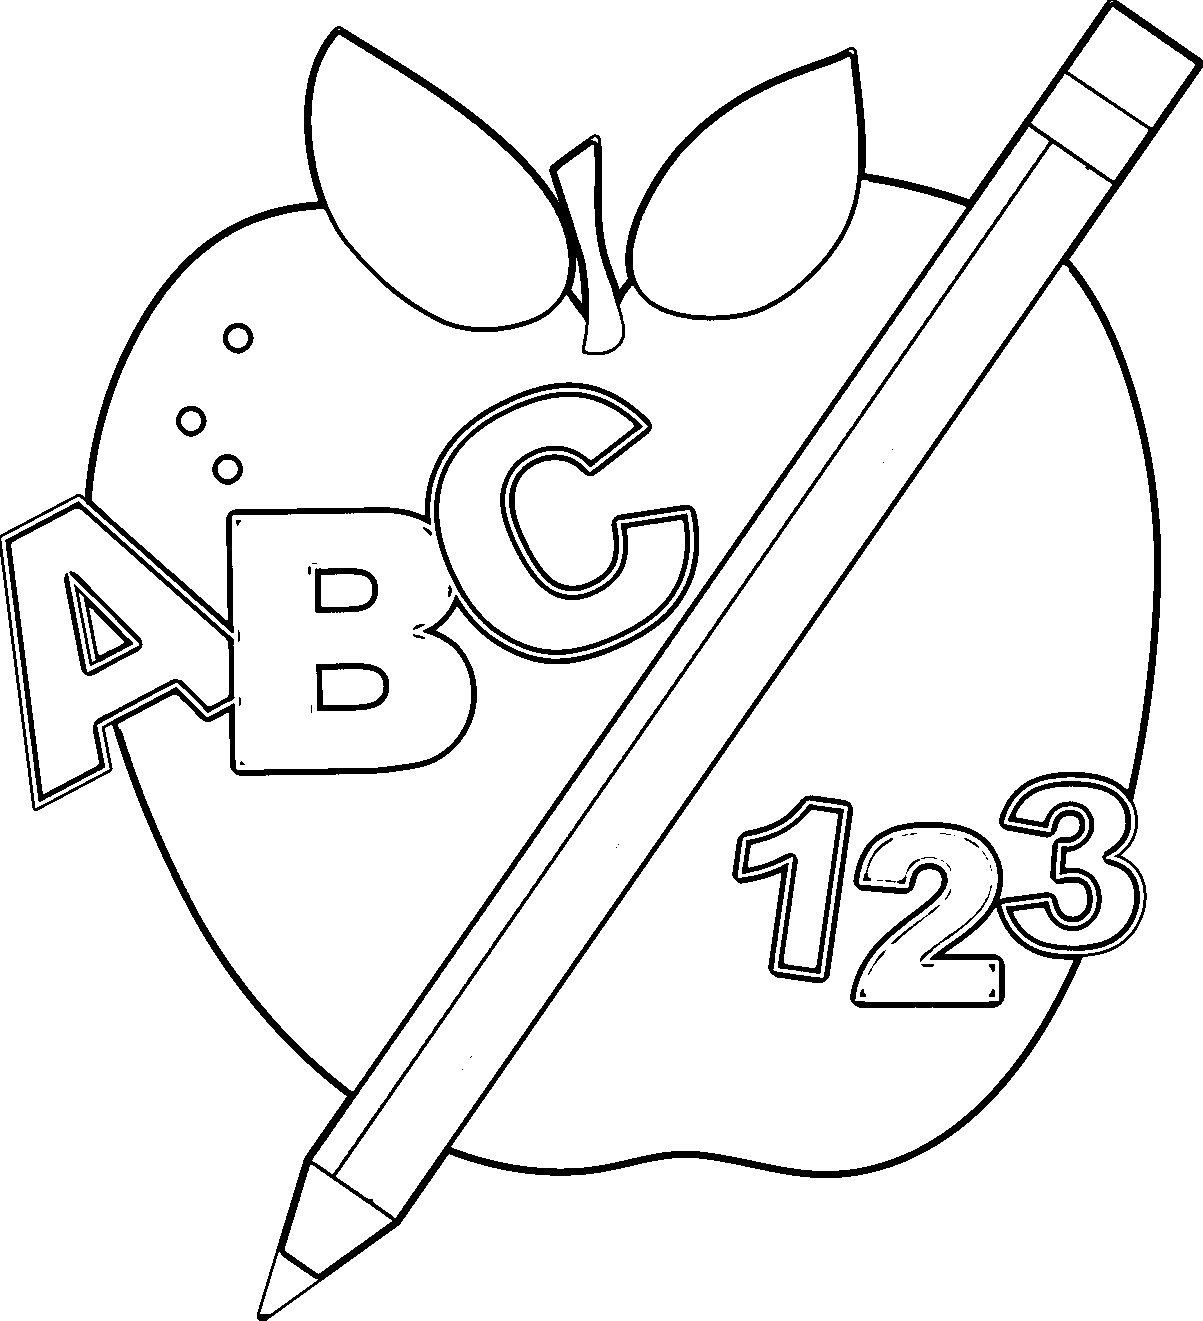 Abc border free clip art images coloring page wecoloringpage